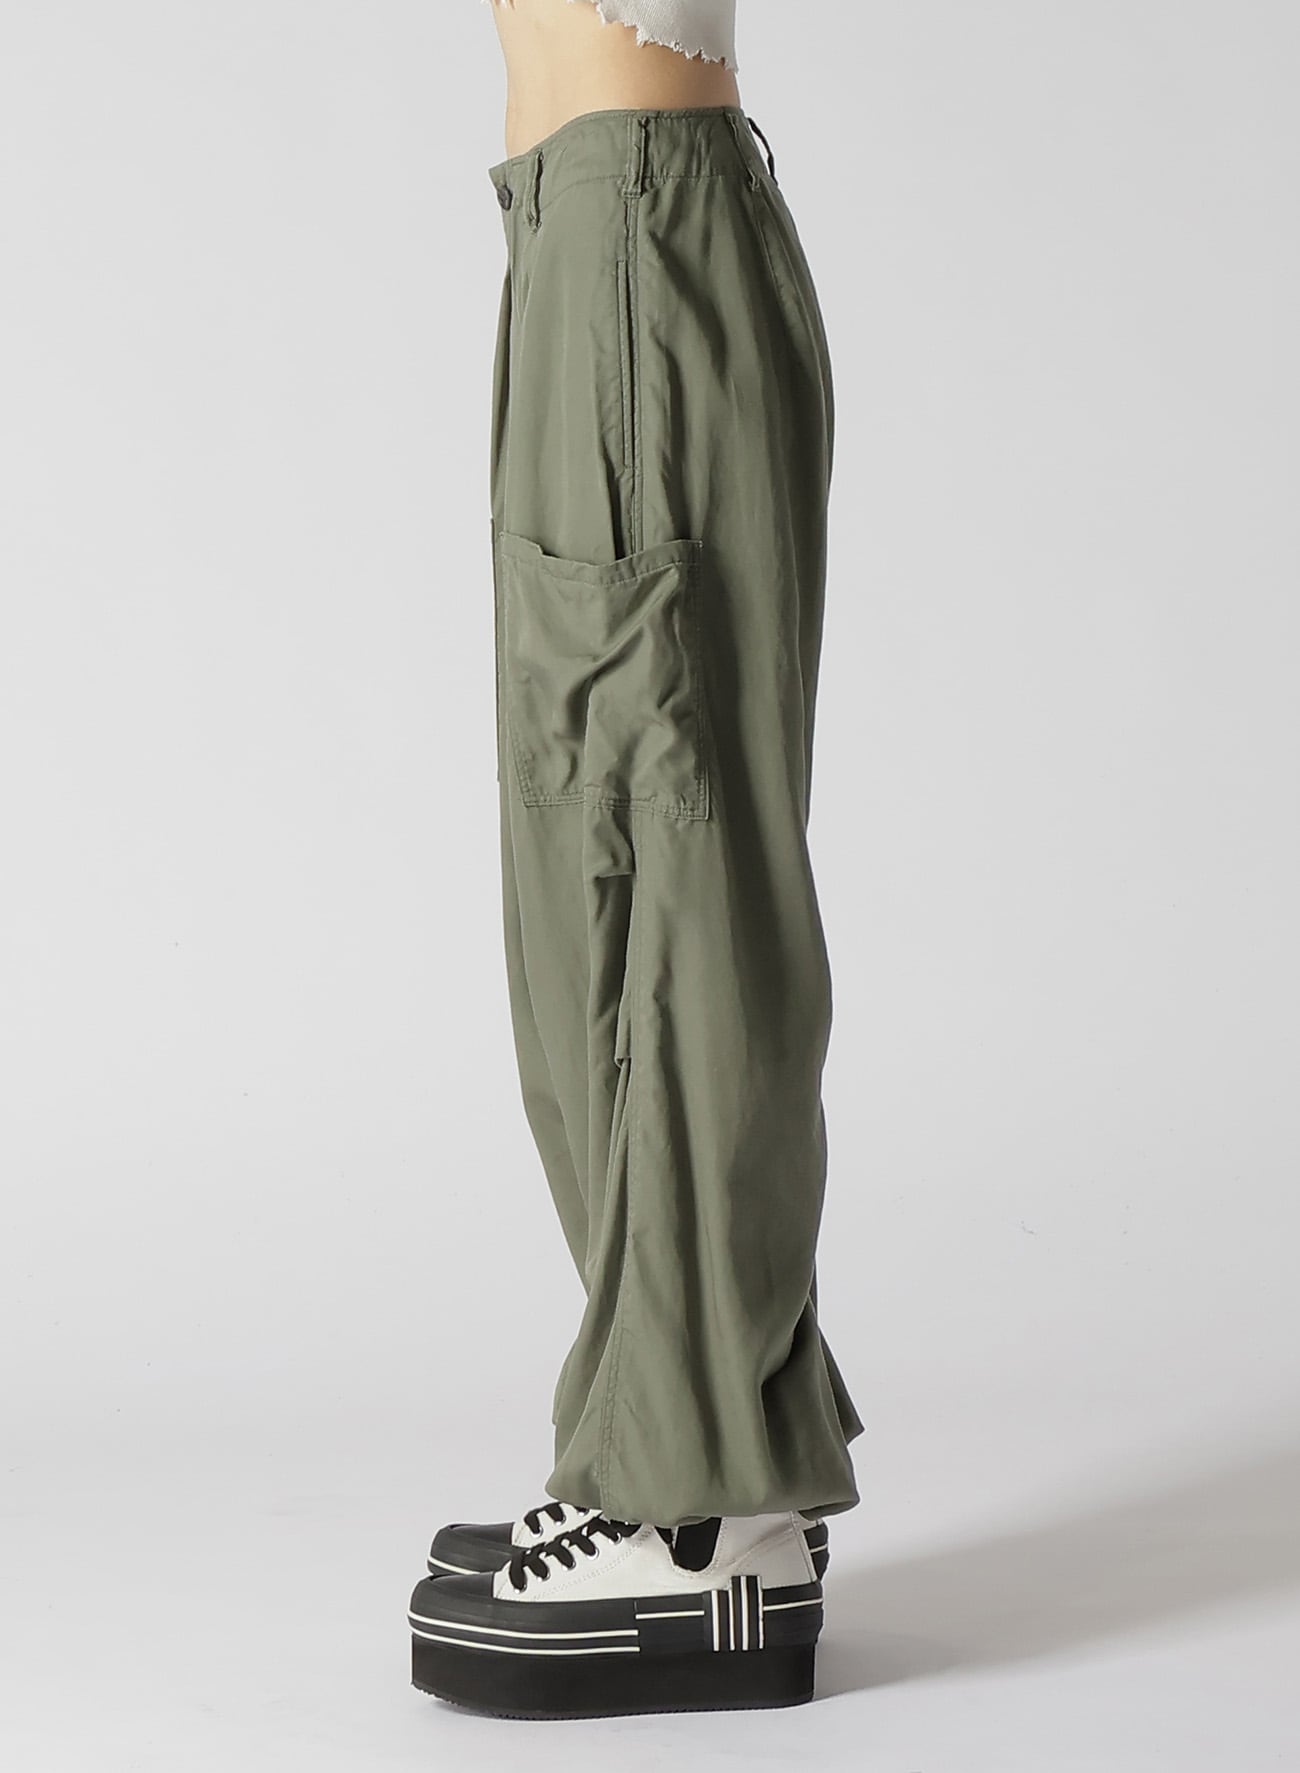 PRODUCT DYED TWILL DRAWCORD PANTS(S Khaki): LIMI feu｜THE SHOP 